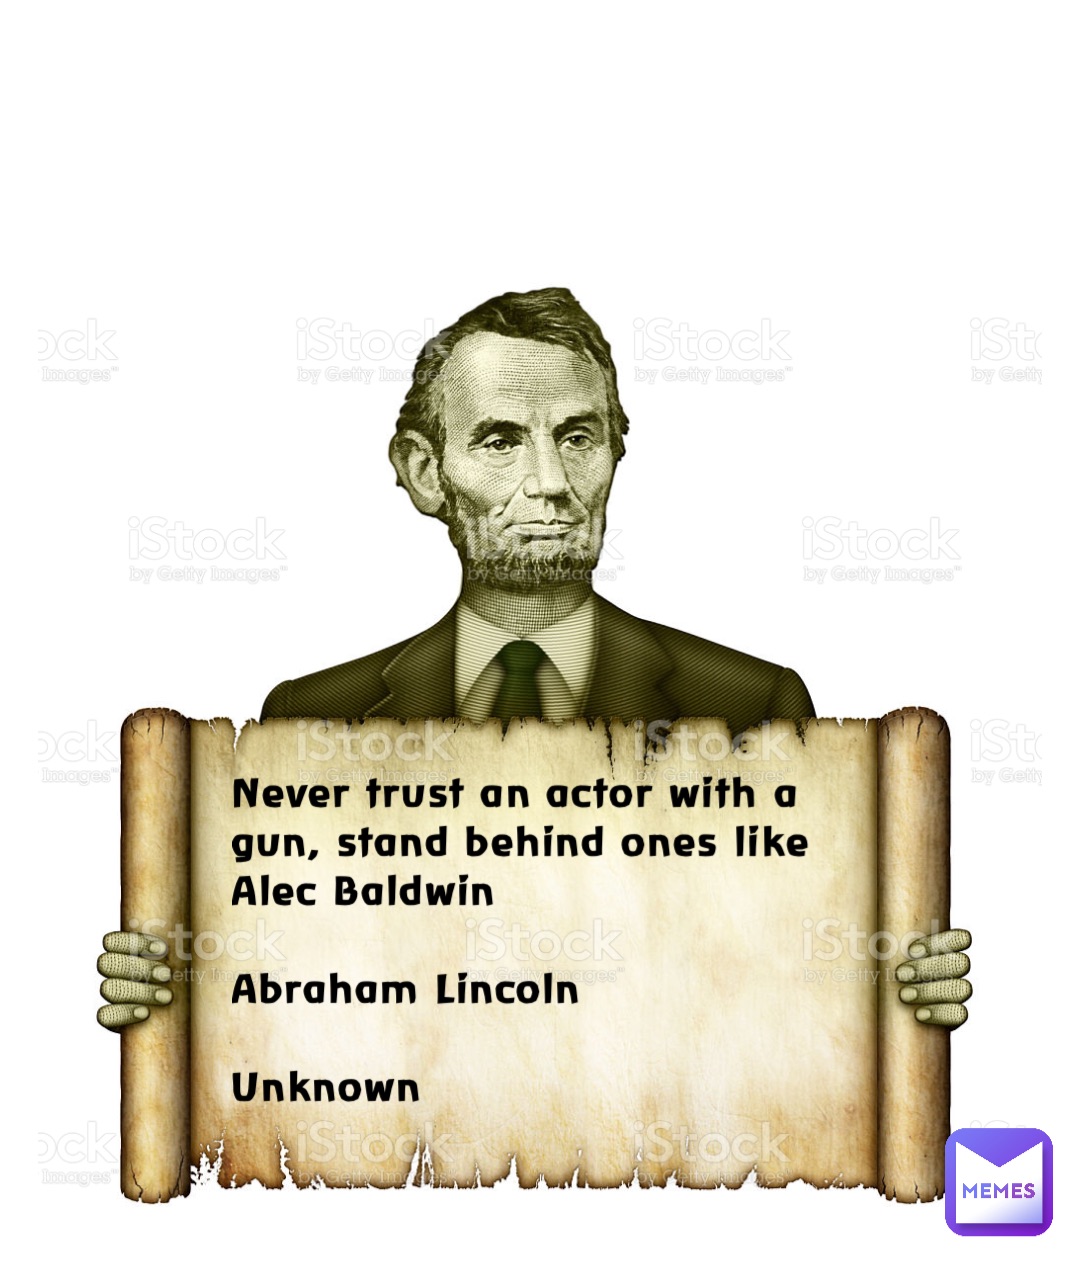 Never trust an actor with a gun, stand behind ones like Alec Baldwin 

Abraham Lincoln 

Unknown